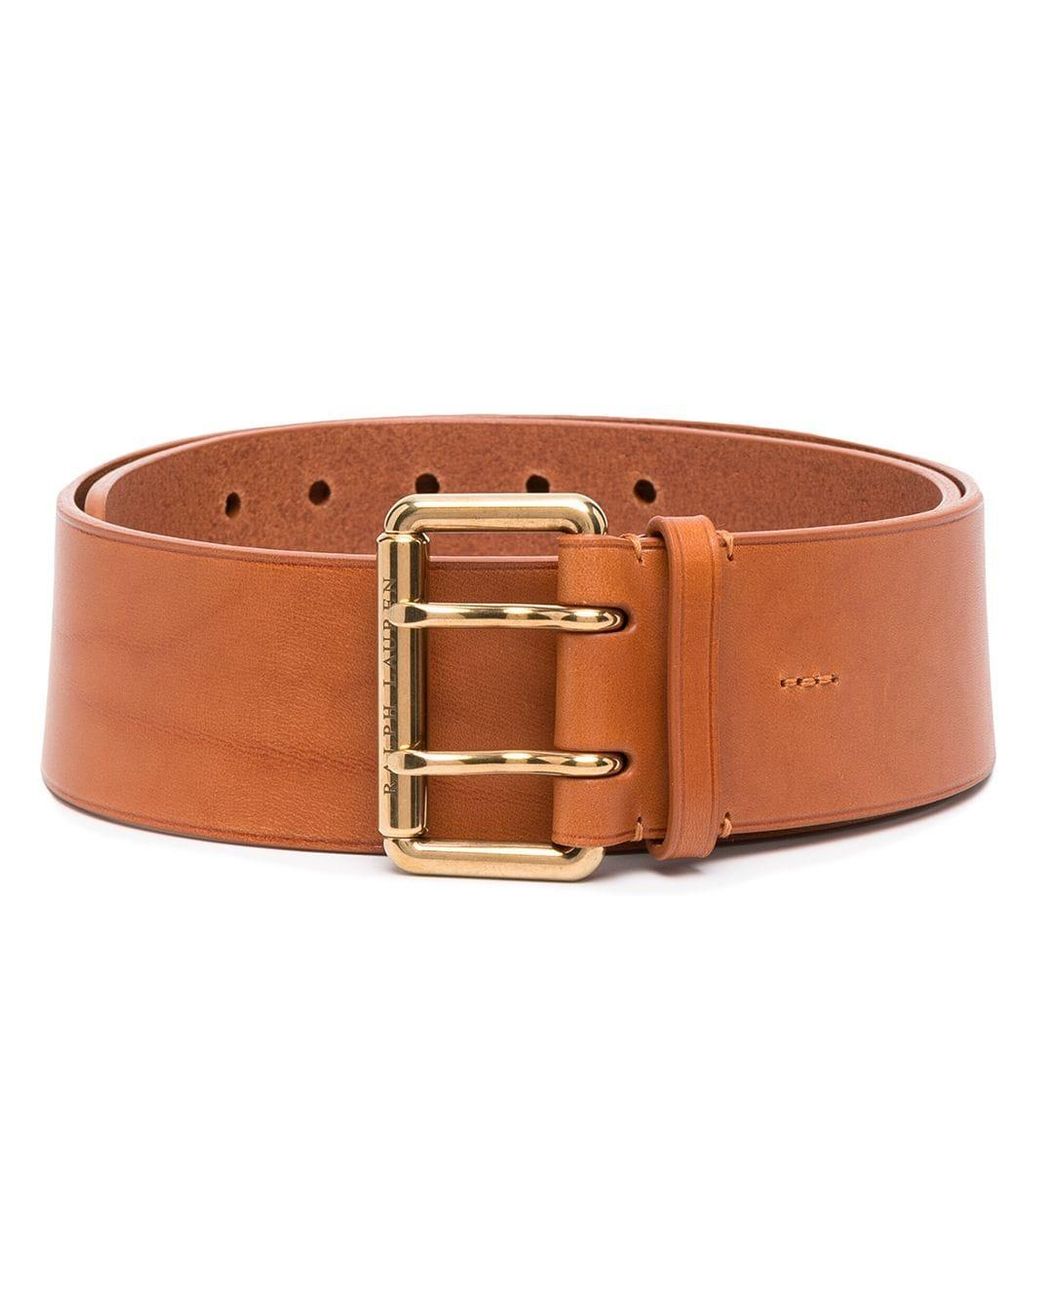 Ralph Lauren Collection Double Prong Leather Belt in Brown - Lyst